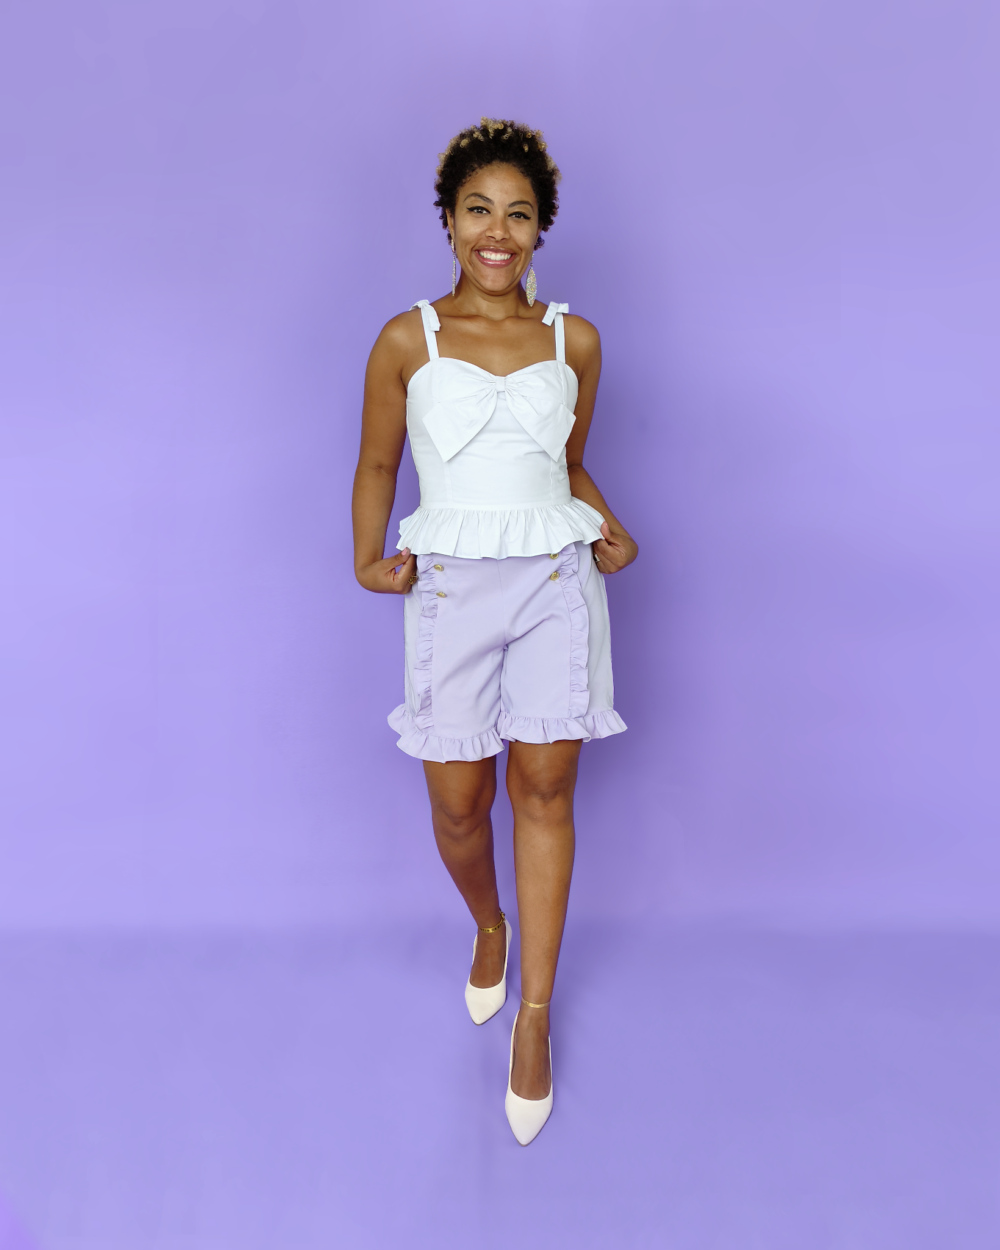 MeLikesTea Travelling Shorts Lavender and Turmalina Bow Top White